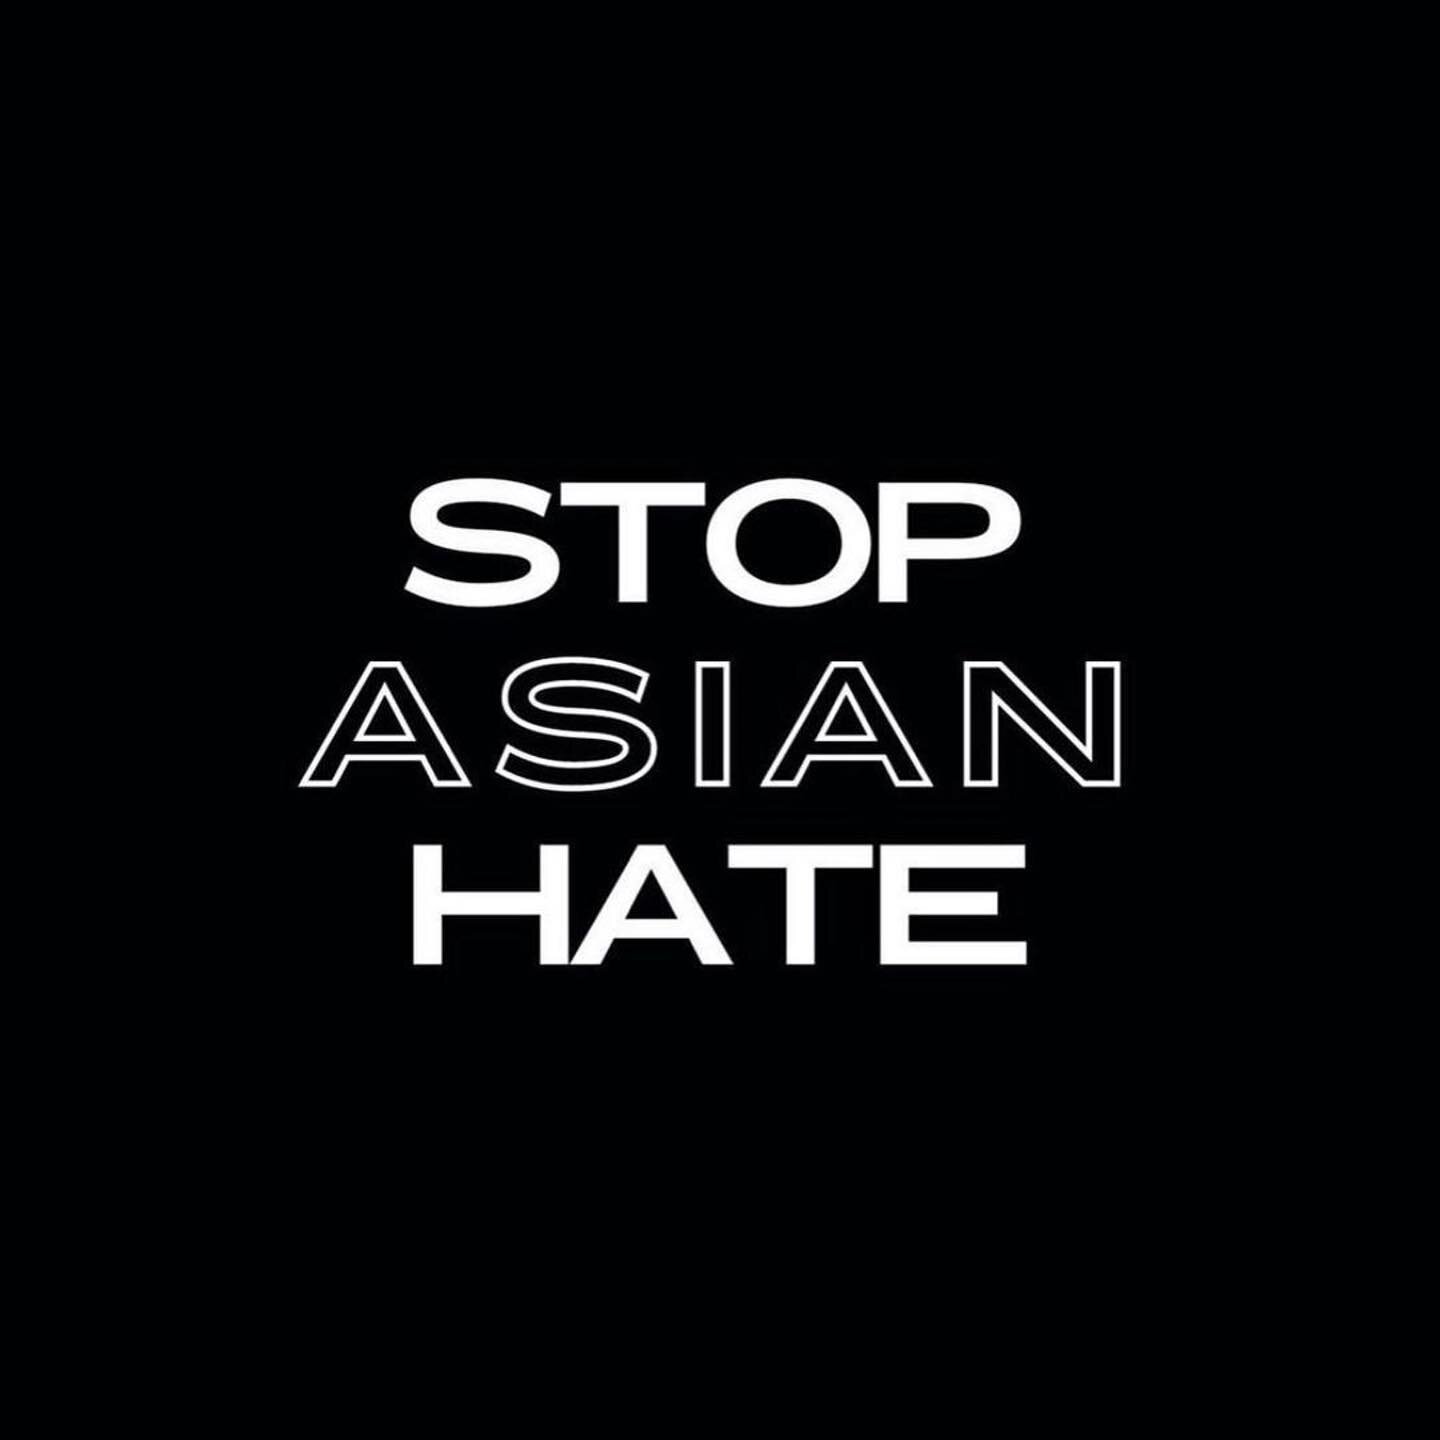 In the past year nearly 3,800 hate crimes against the AAPI community have been reported in the U.S. 

There has sadly been a long history of violence against the AAPI community in the U.S. 

Trump &amp; the right wing have further fanned the flames. 